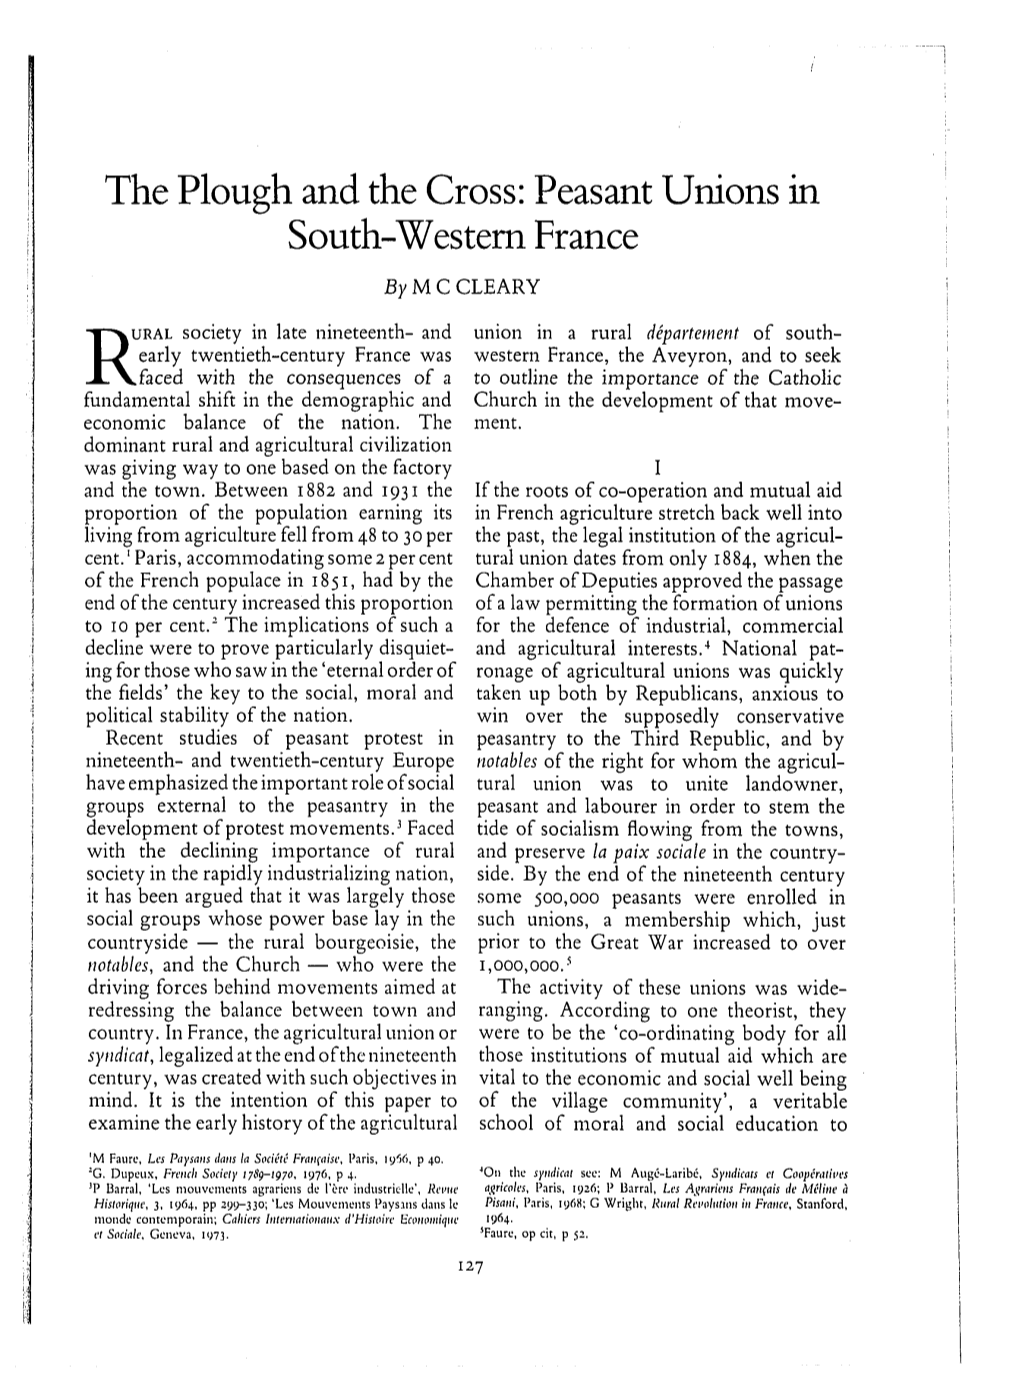 The Plough and the Cross: Peasant Unions in South-Western France by M C CLEARY